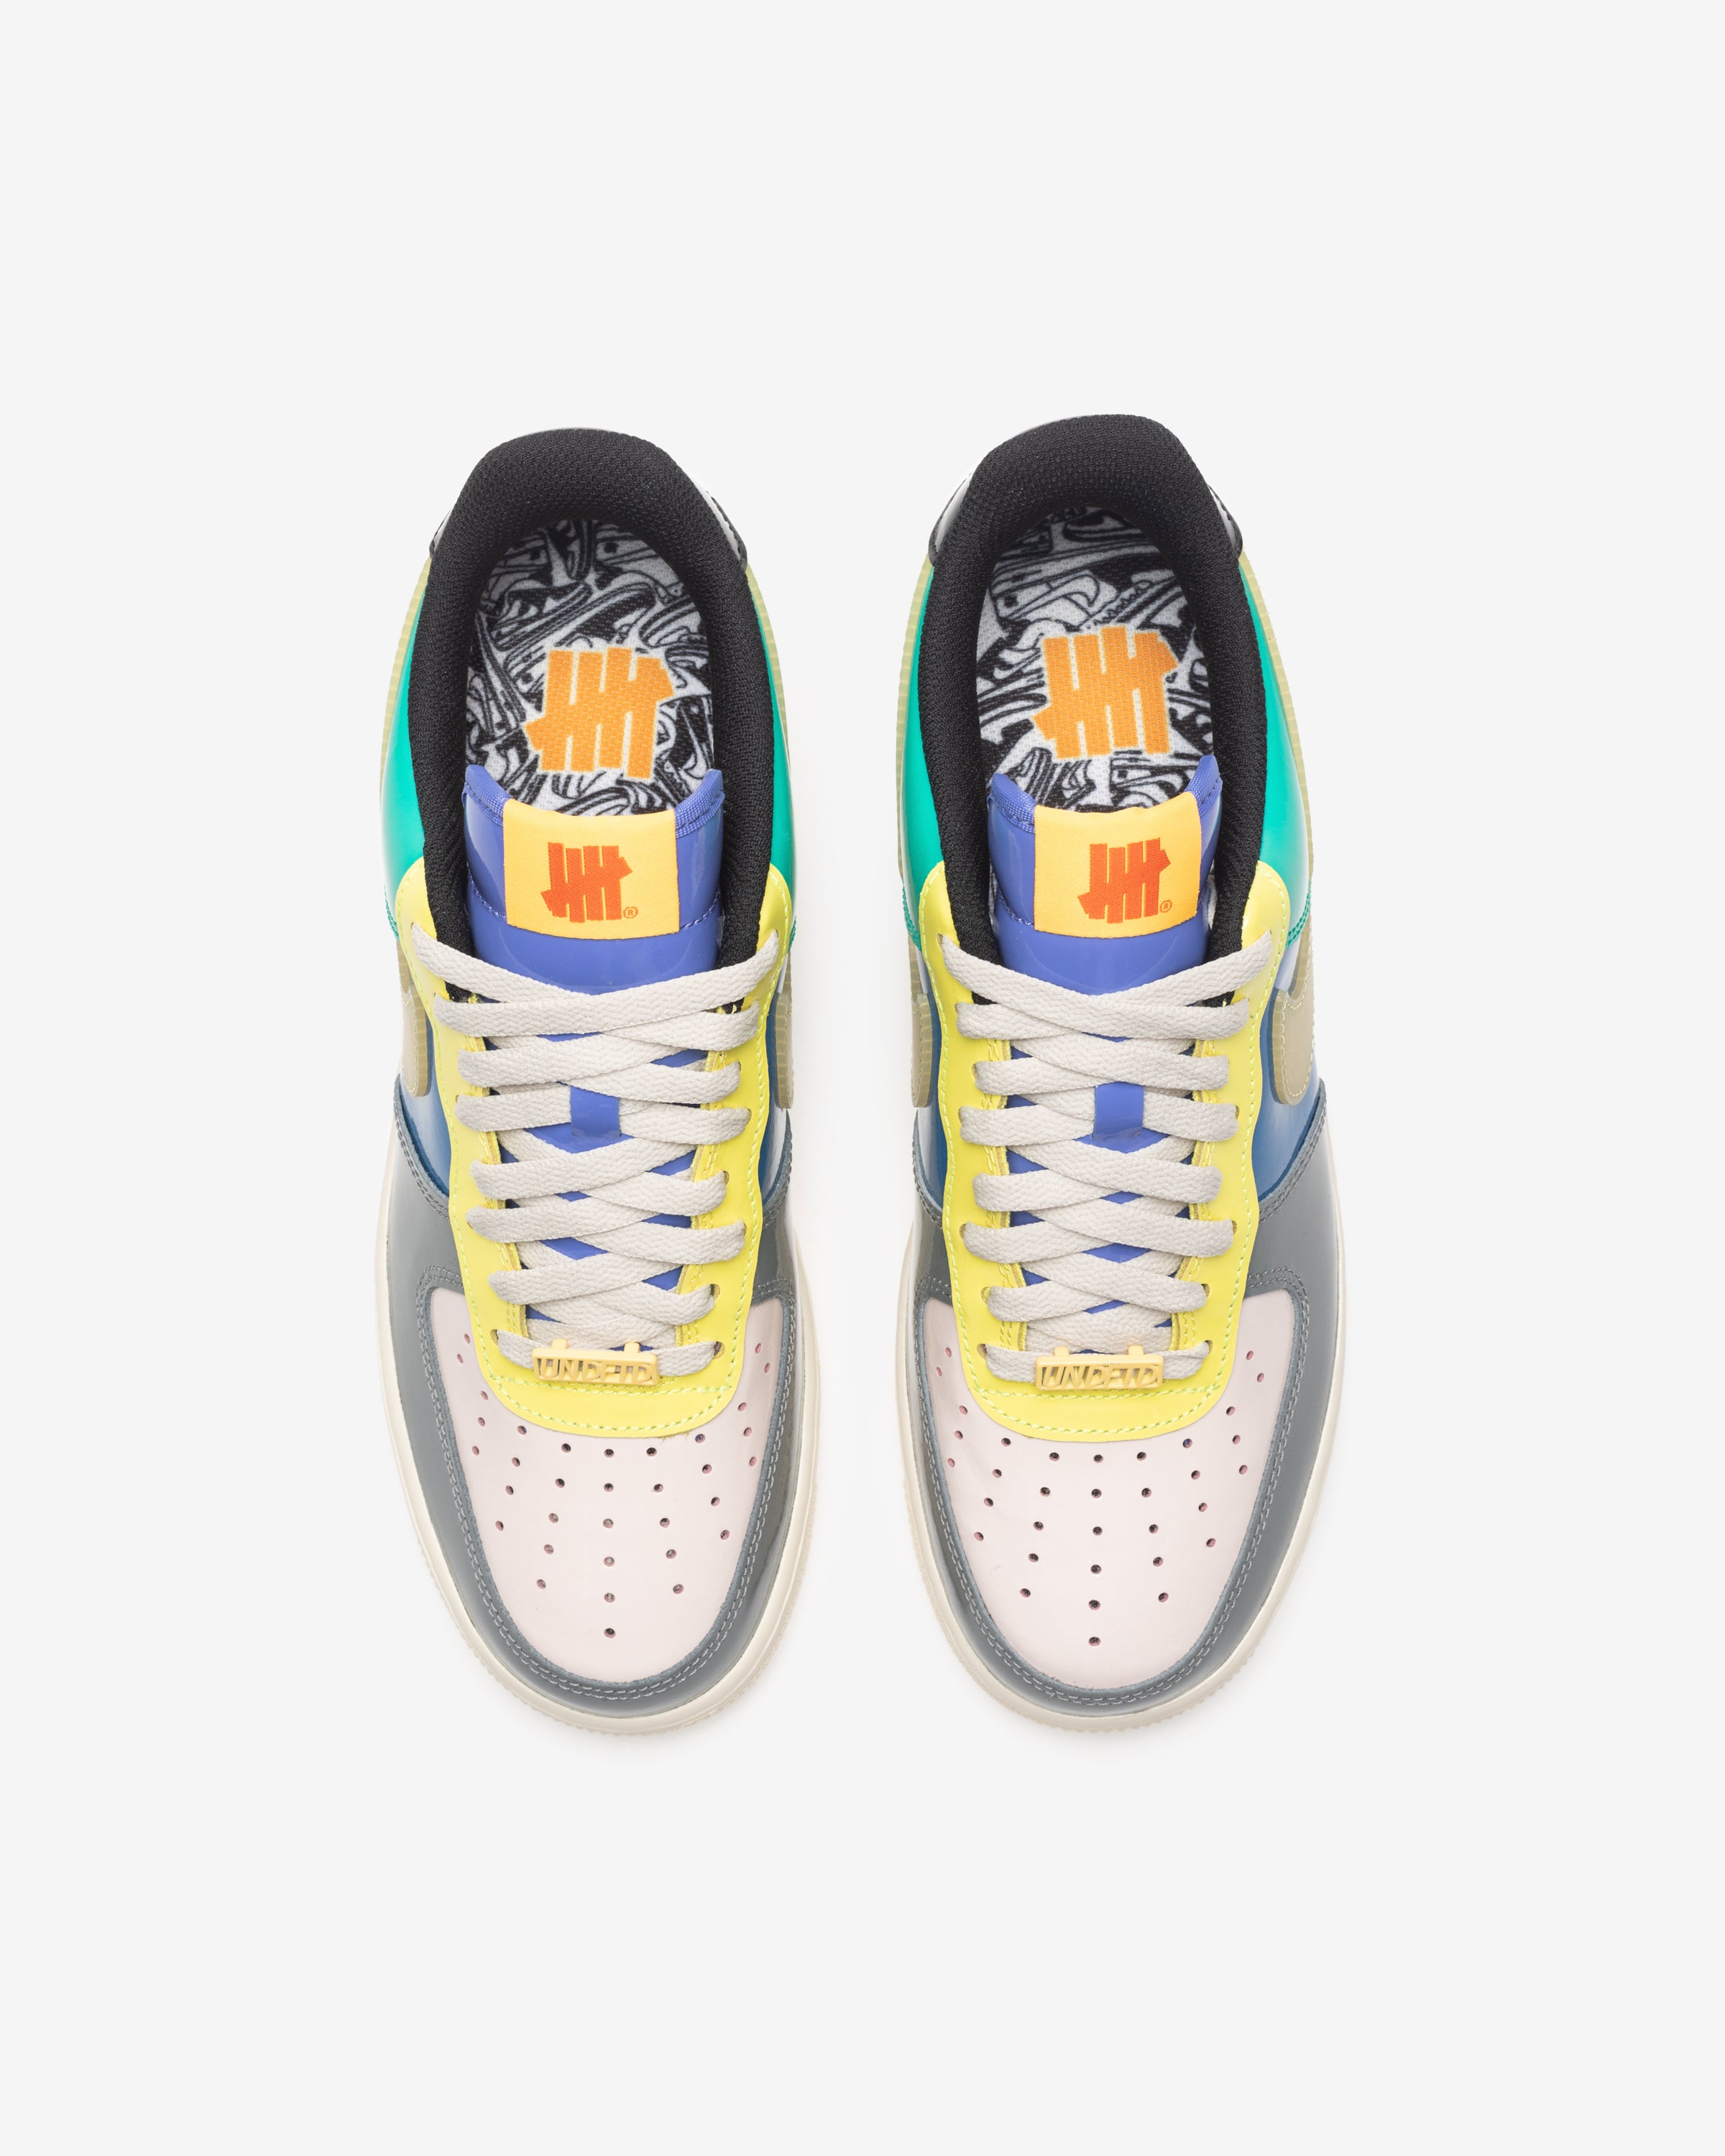 UNDEFEATED X NIKE AIR FORCE 1 LOW SP - SMOKEGREY/ GOLD/ MULTI